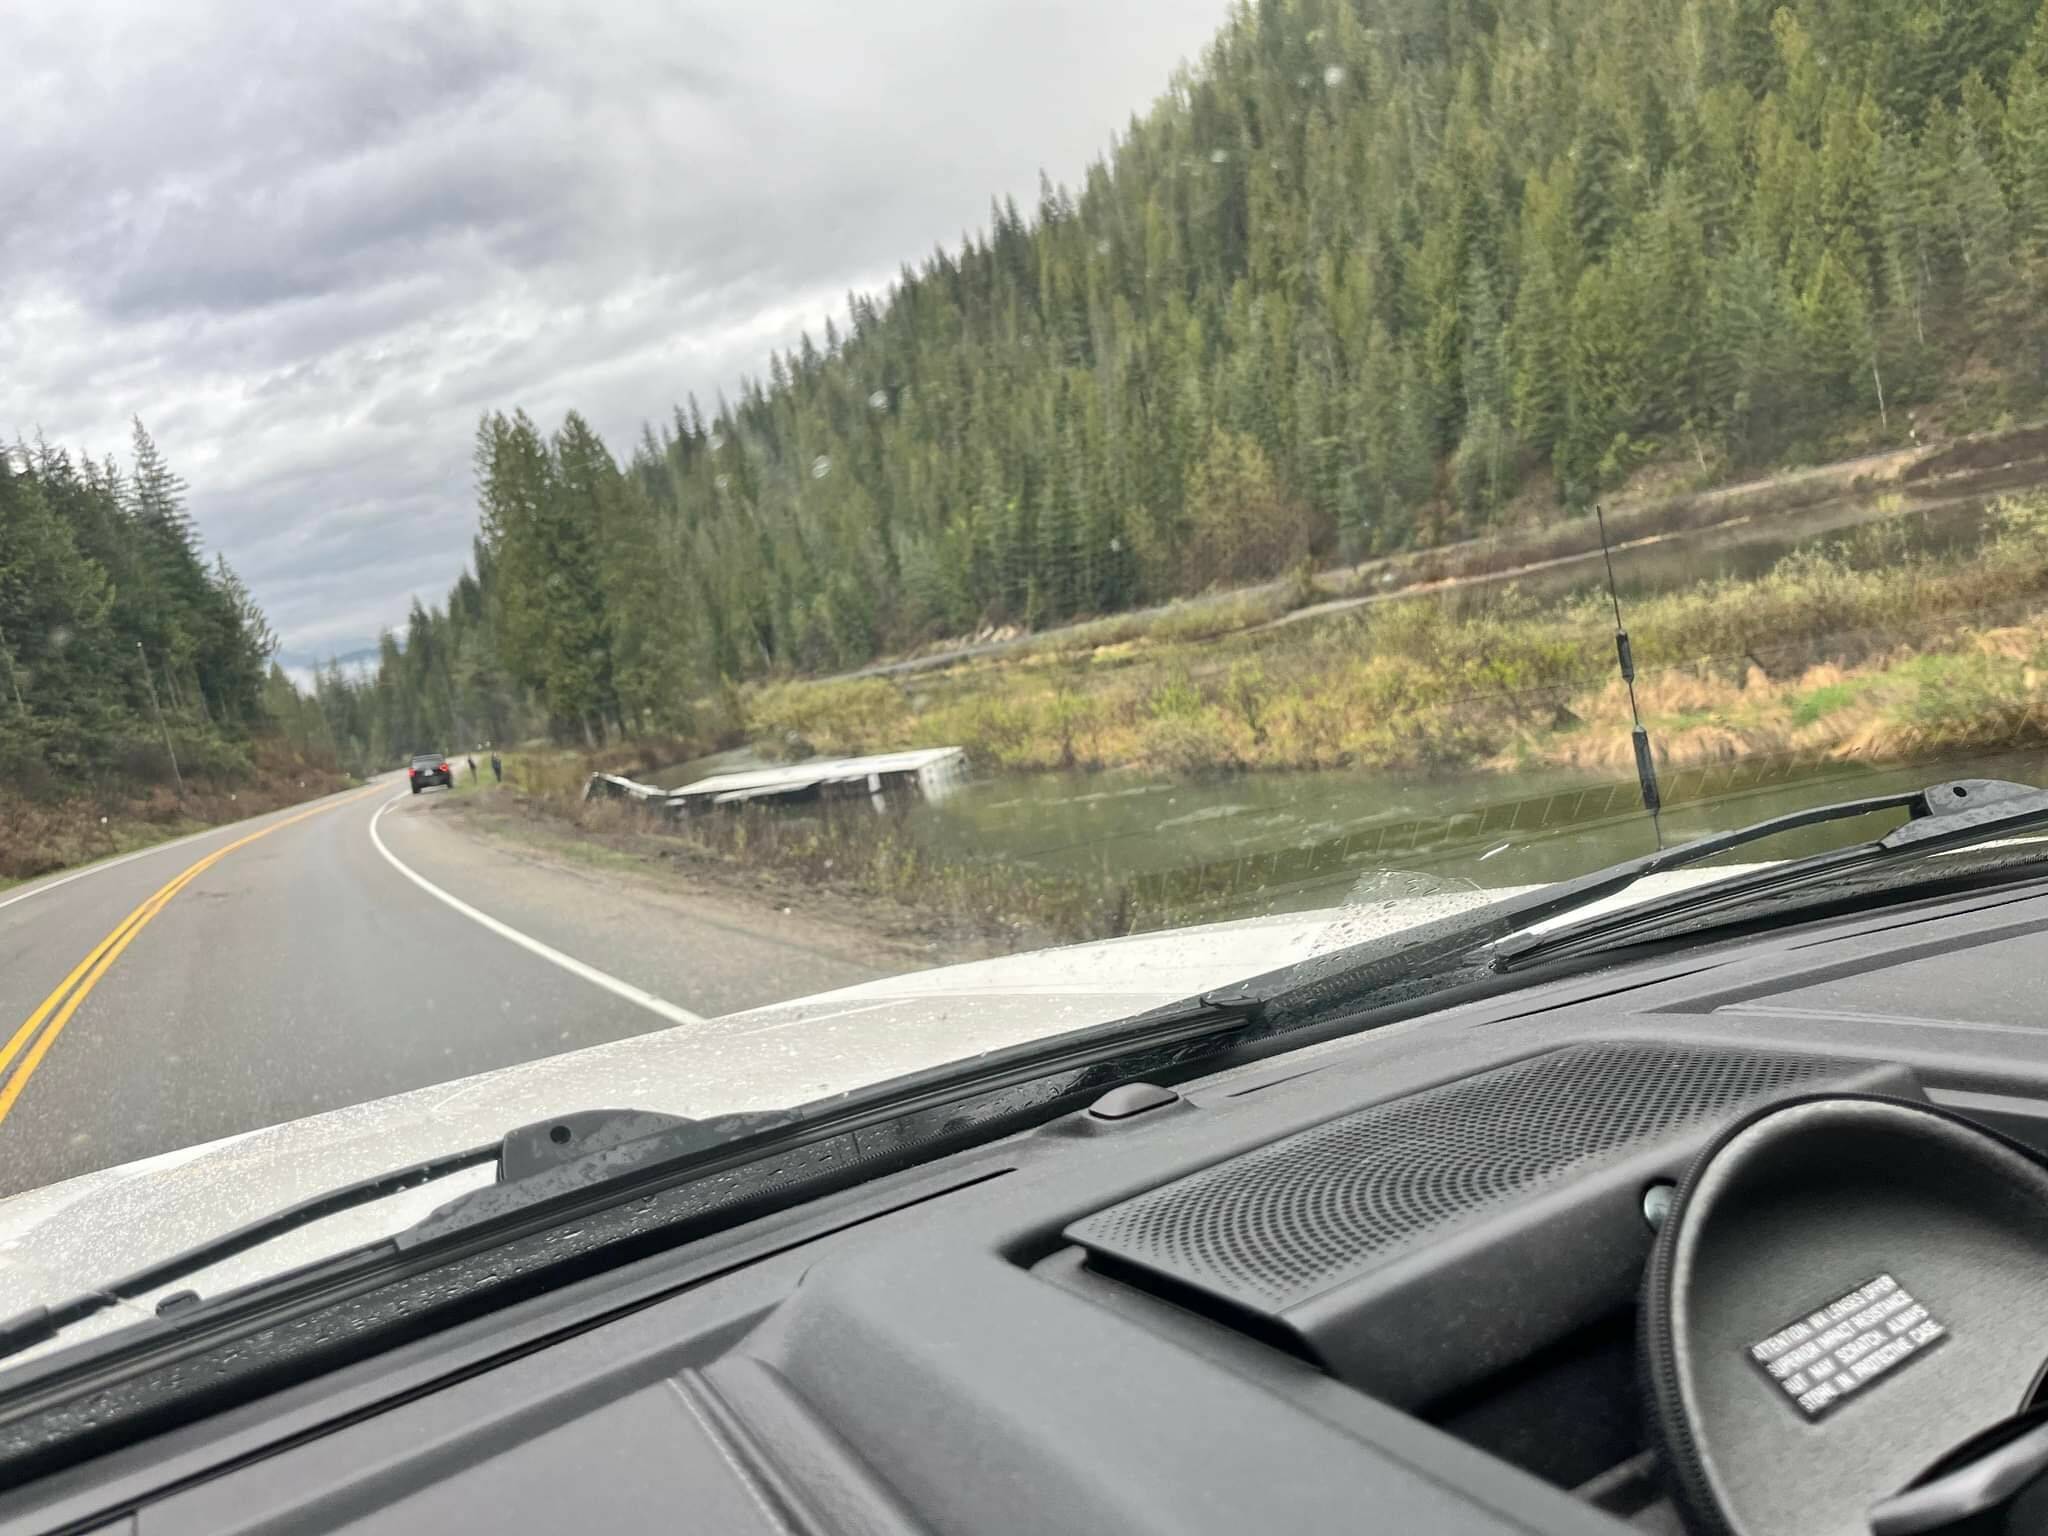 A Gold Freight semi-truck careened into a swamp on Highway 1 near Revelstoke on May 5. (Skilled Truckers Canada Facebook)